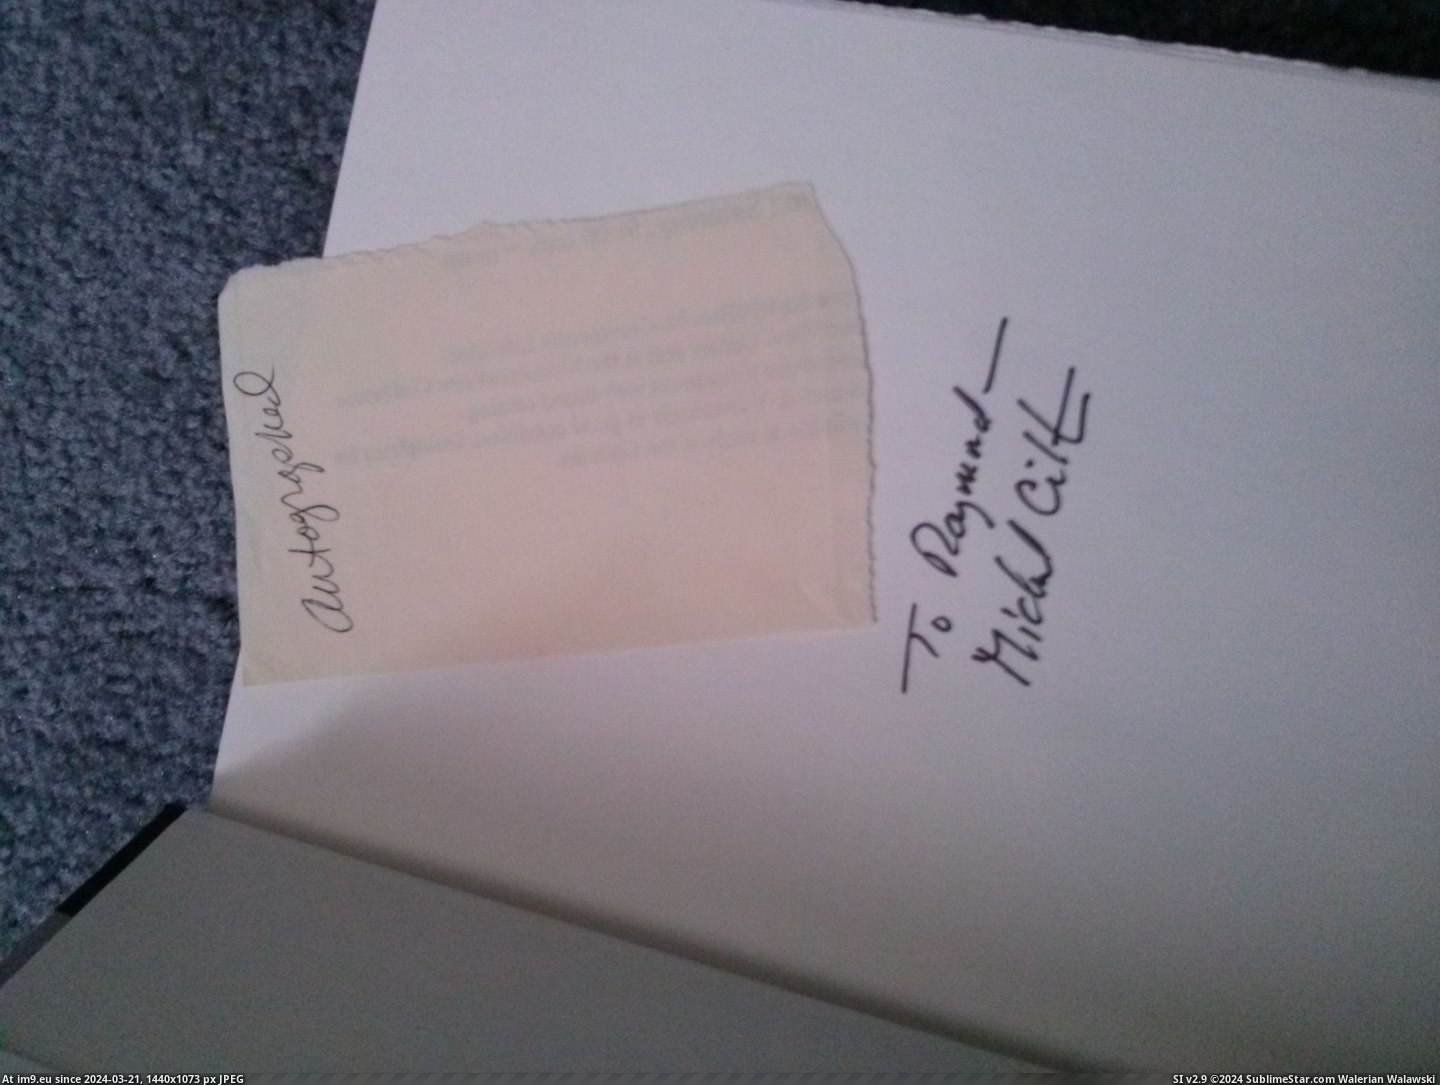 #For #Was #Pretty #Goodwill #Prey #Autographed #Crichton #Cool #Picked #Michael [Mildlyinteresting] Picked up 'Prey' by Michael Crichton at a Goodwill today for $2.99, and it was autographed. Pretty cool. Pic. (Image of album My r/MILDLYINTERESTING favs))